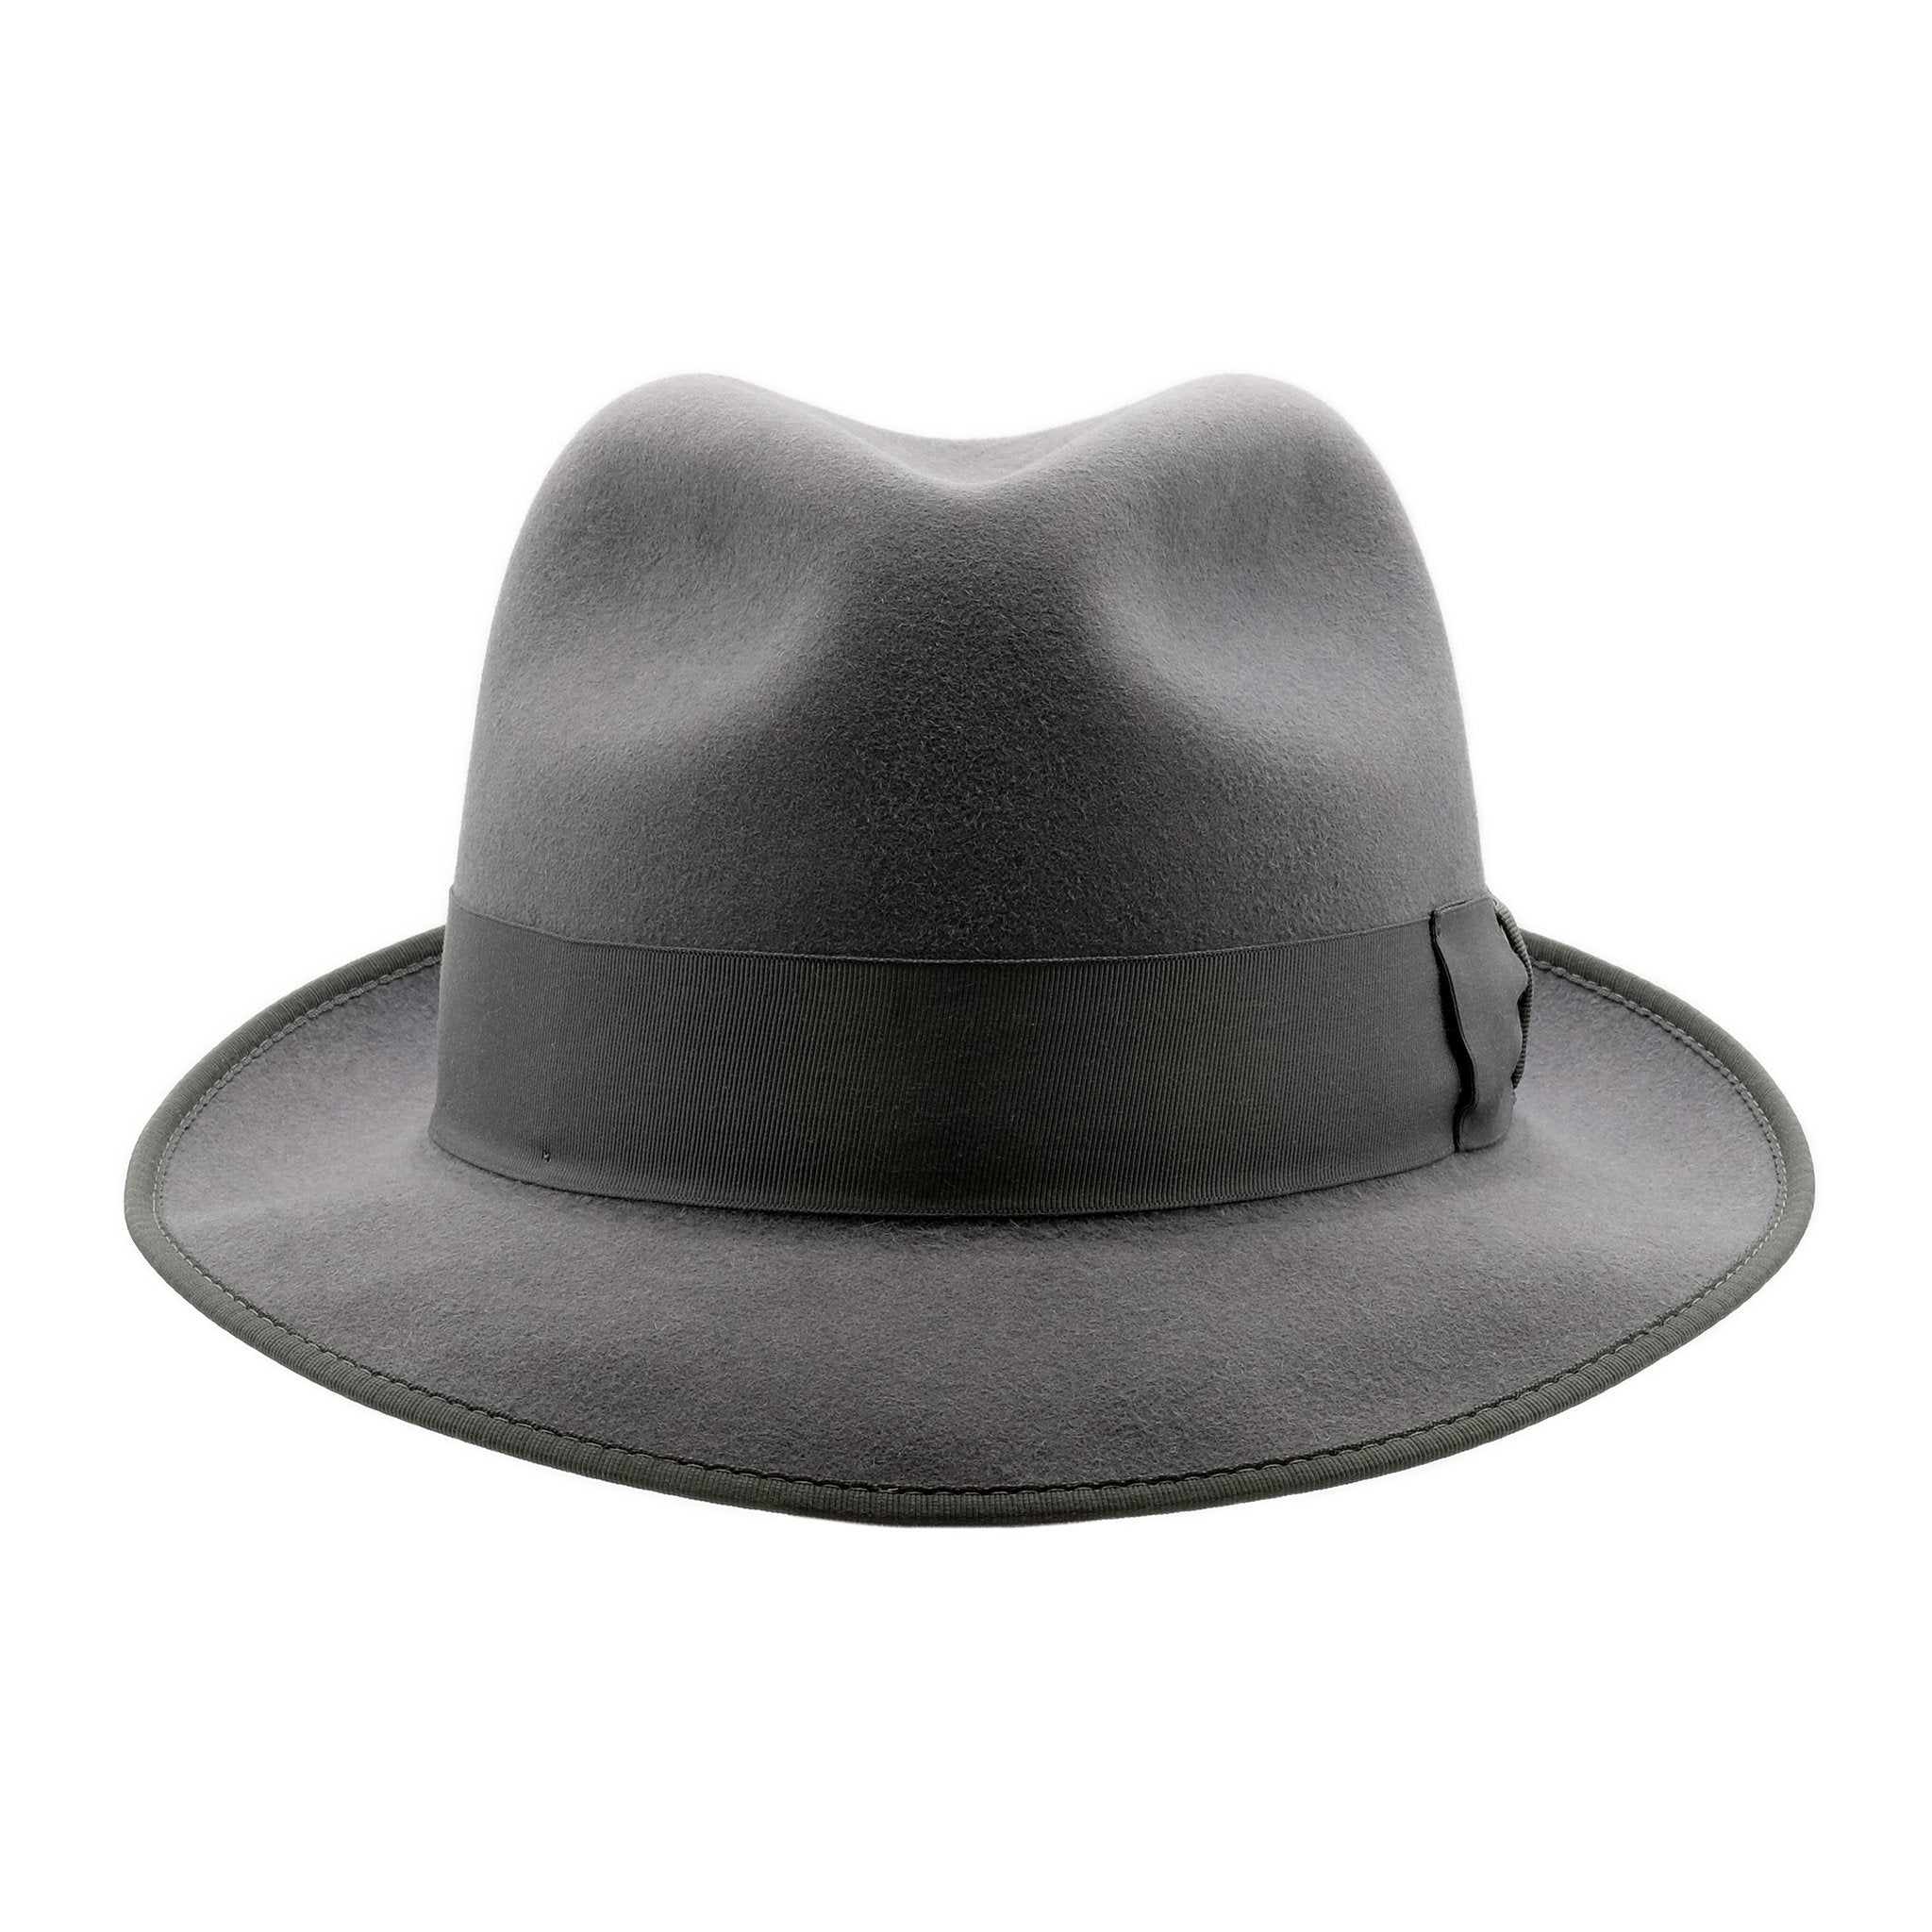 Front-on view of Akubra Hampton hat in Cruiser Grey colour